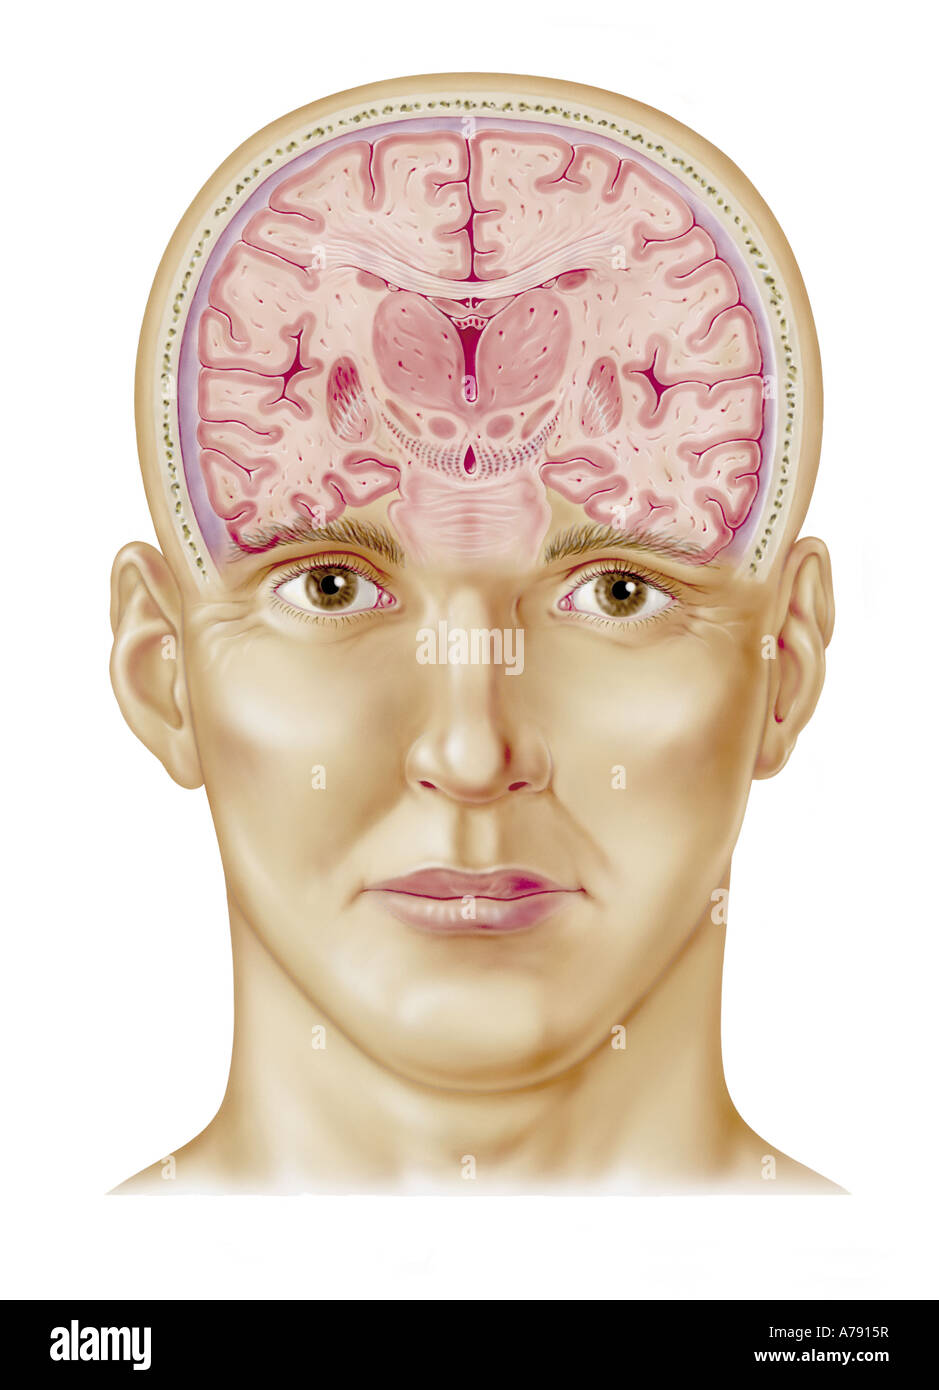 An illustration of a brain cross section Stock Photo